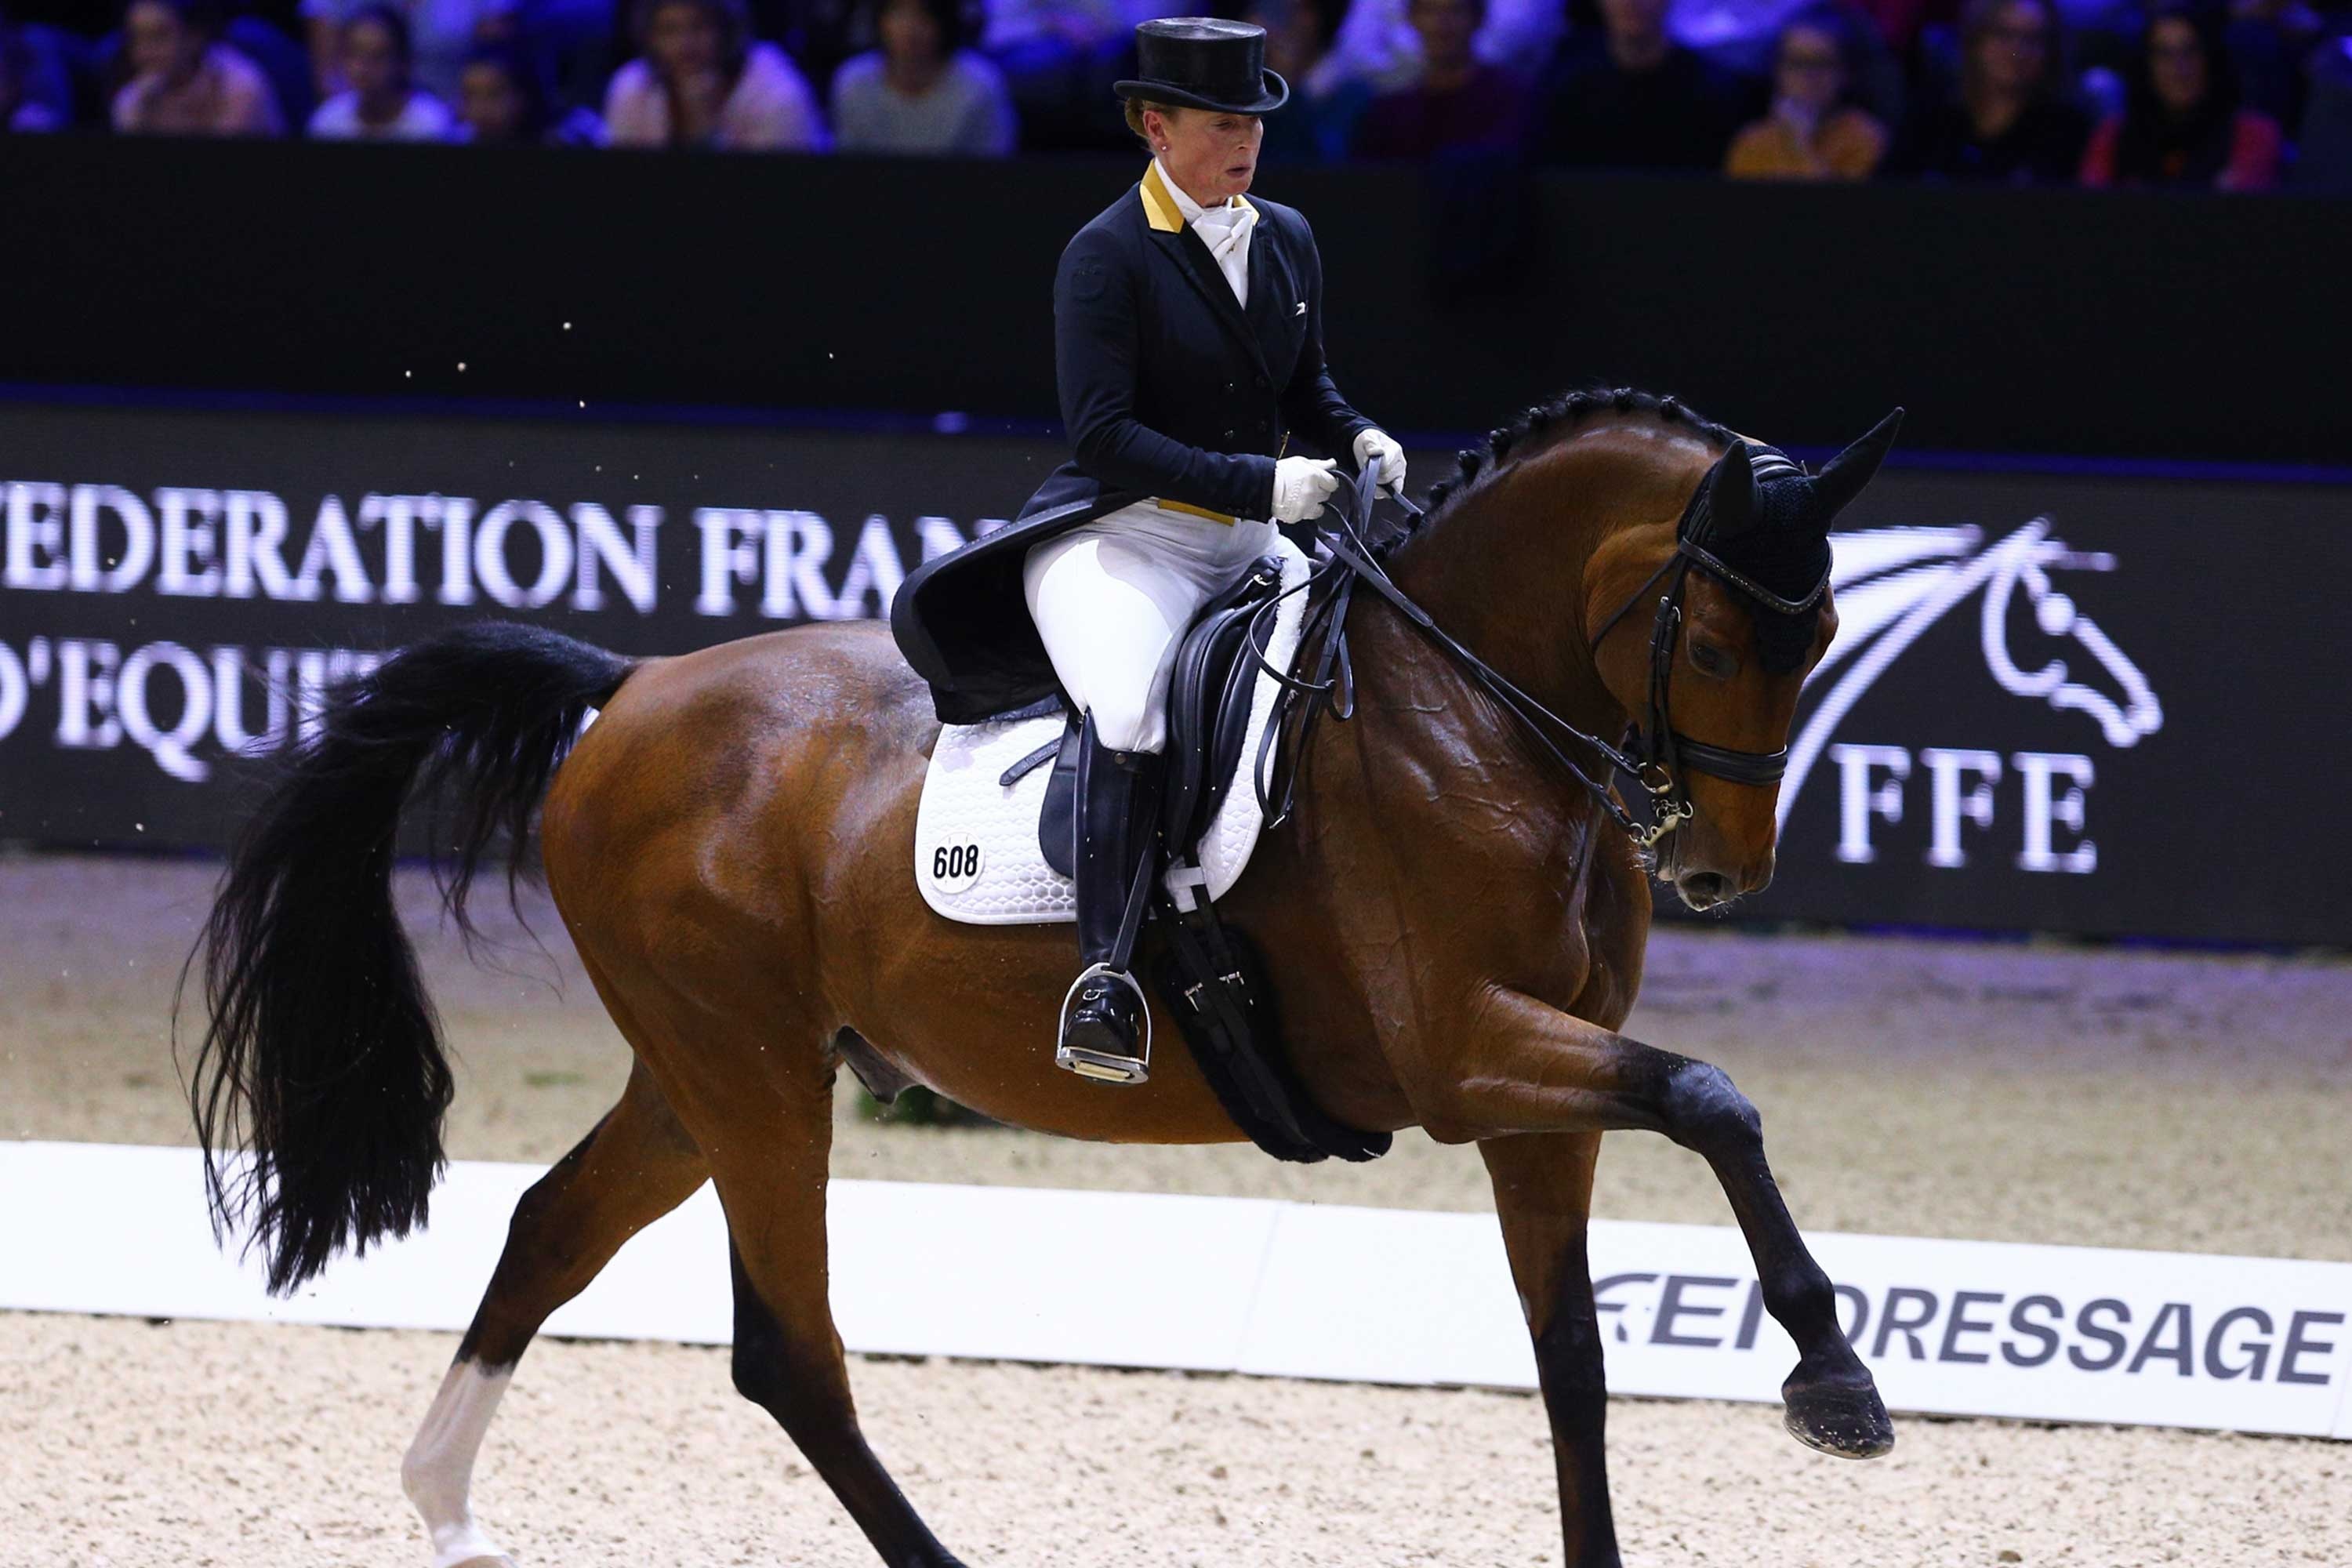 Dressage: The FEI World Cup Dressage, Staged in Equita Lyon, Internationals and nationals classes, Horse Riding. 3000x2000 HD Wallpaper.